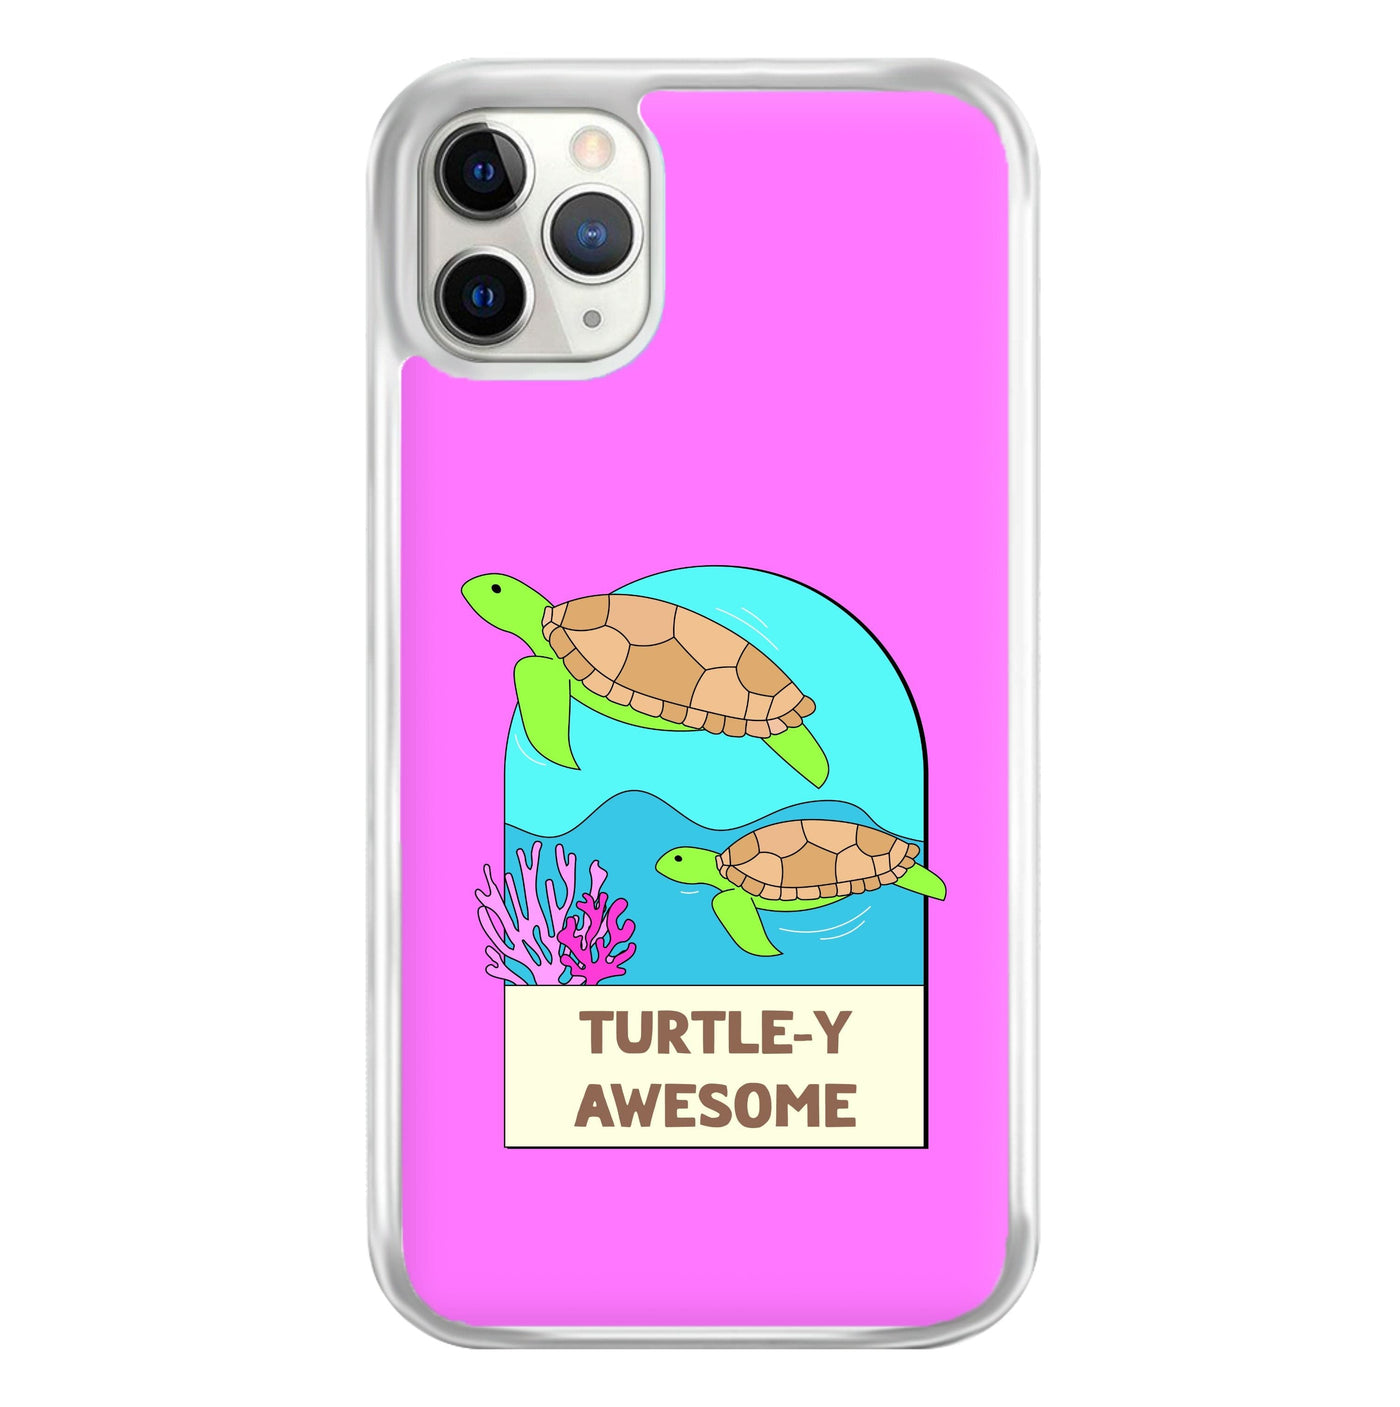 Turtle-y Awesome - Sealife Phone Case